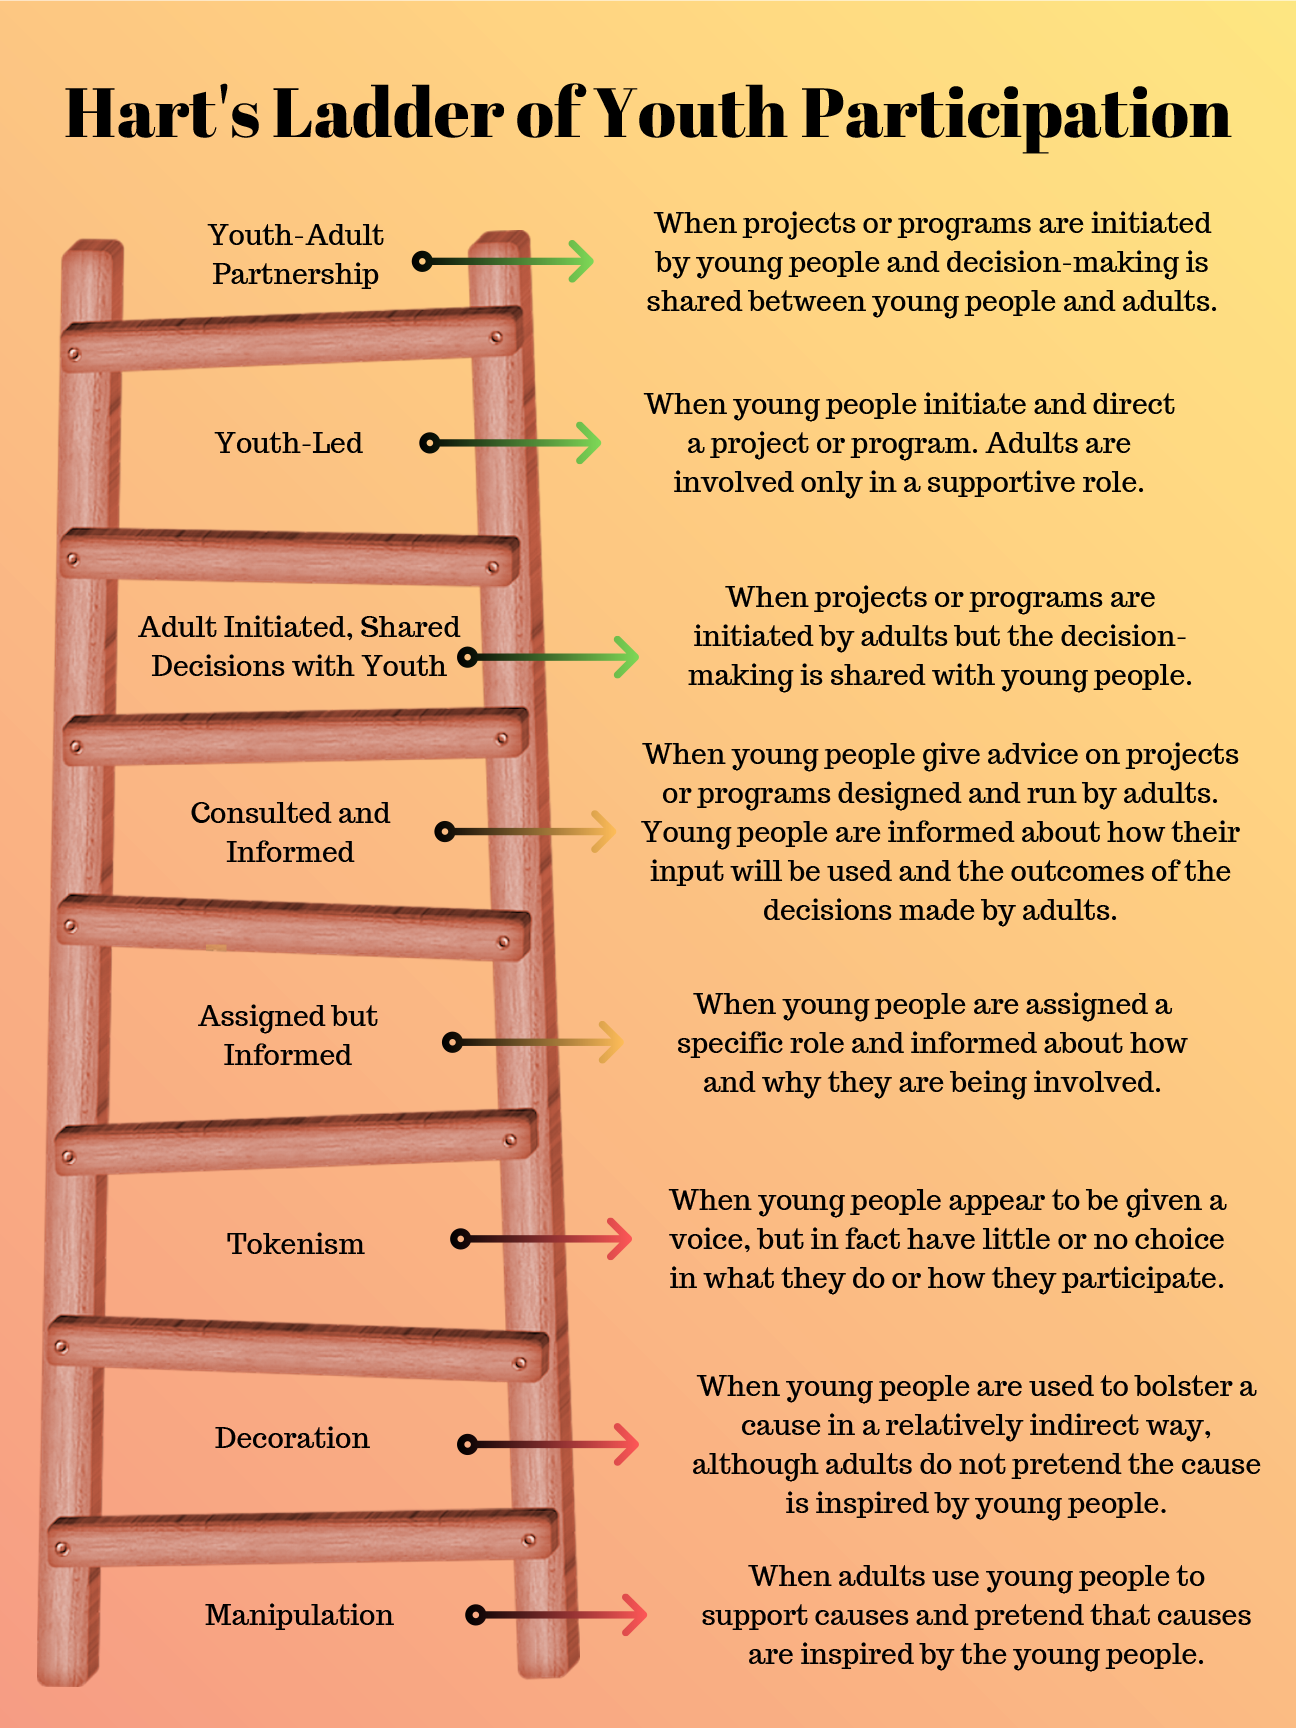 Hart's Ladder - click on image to open PDF version